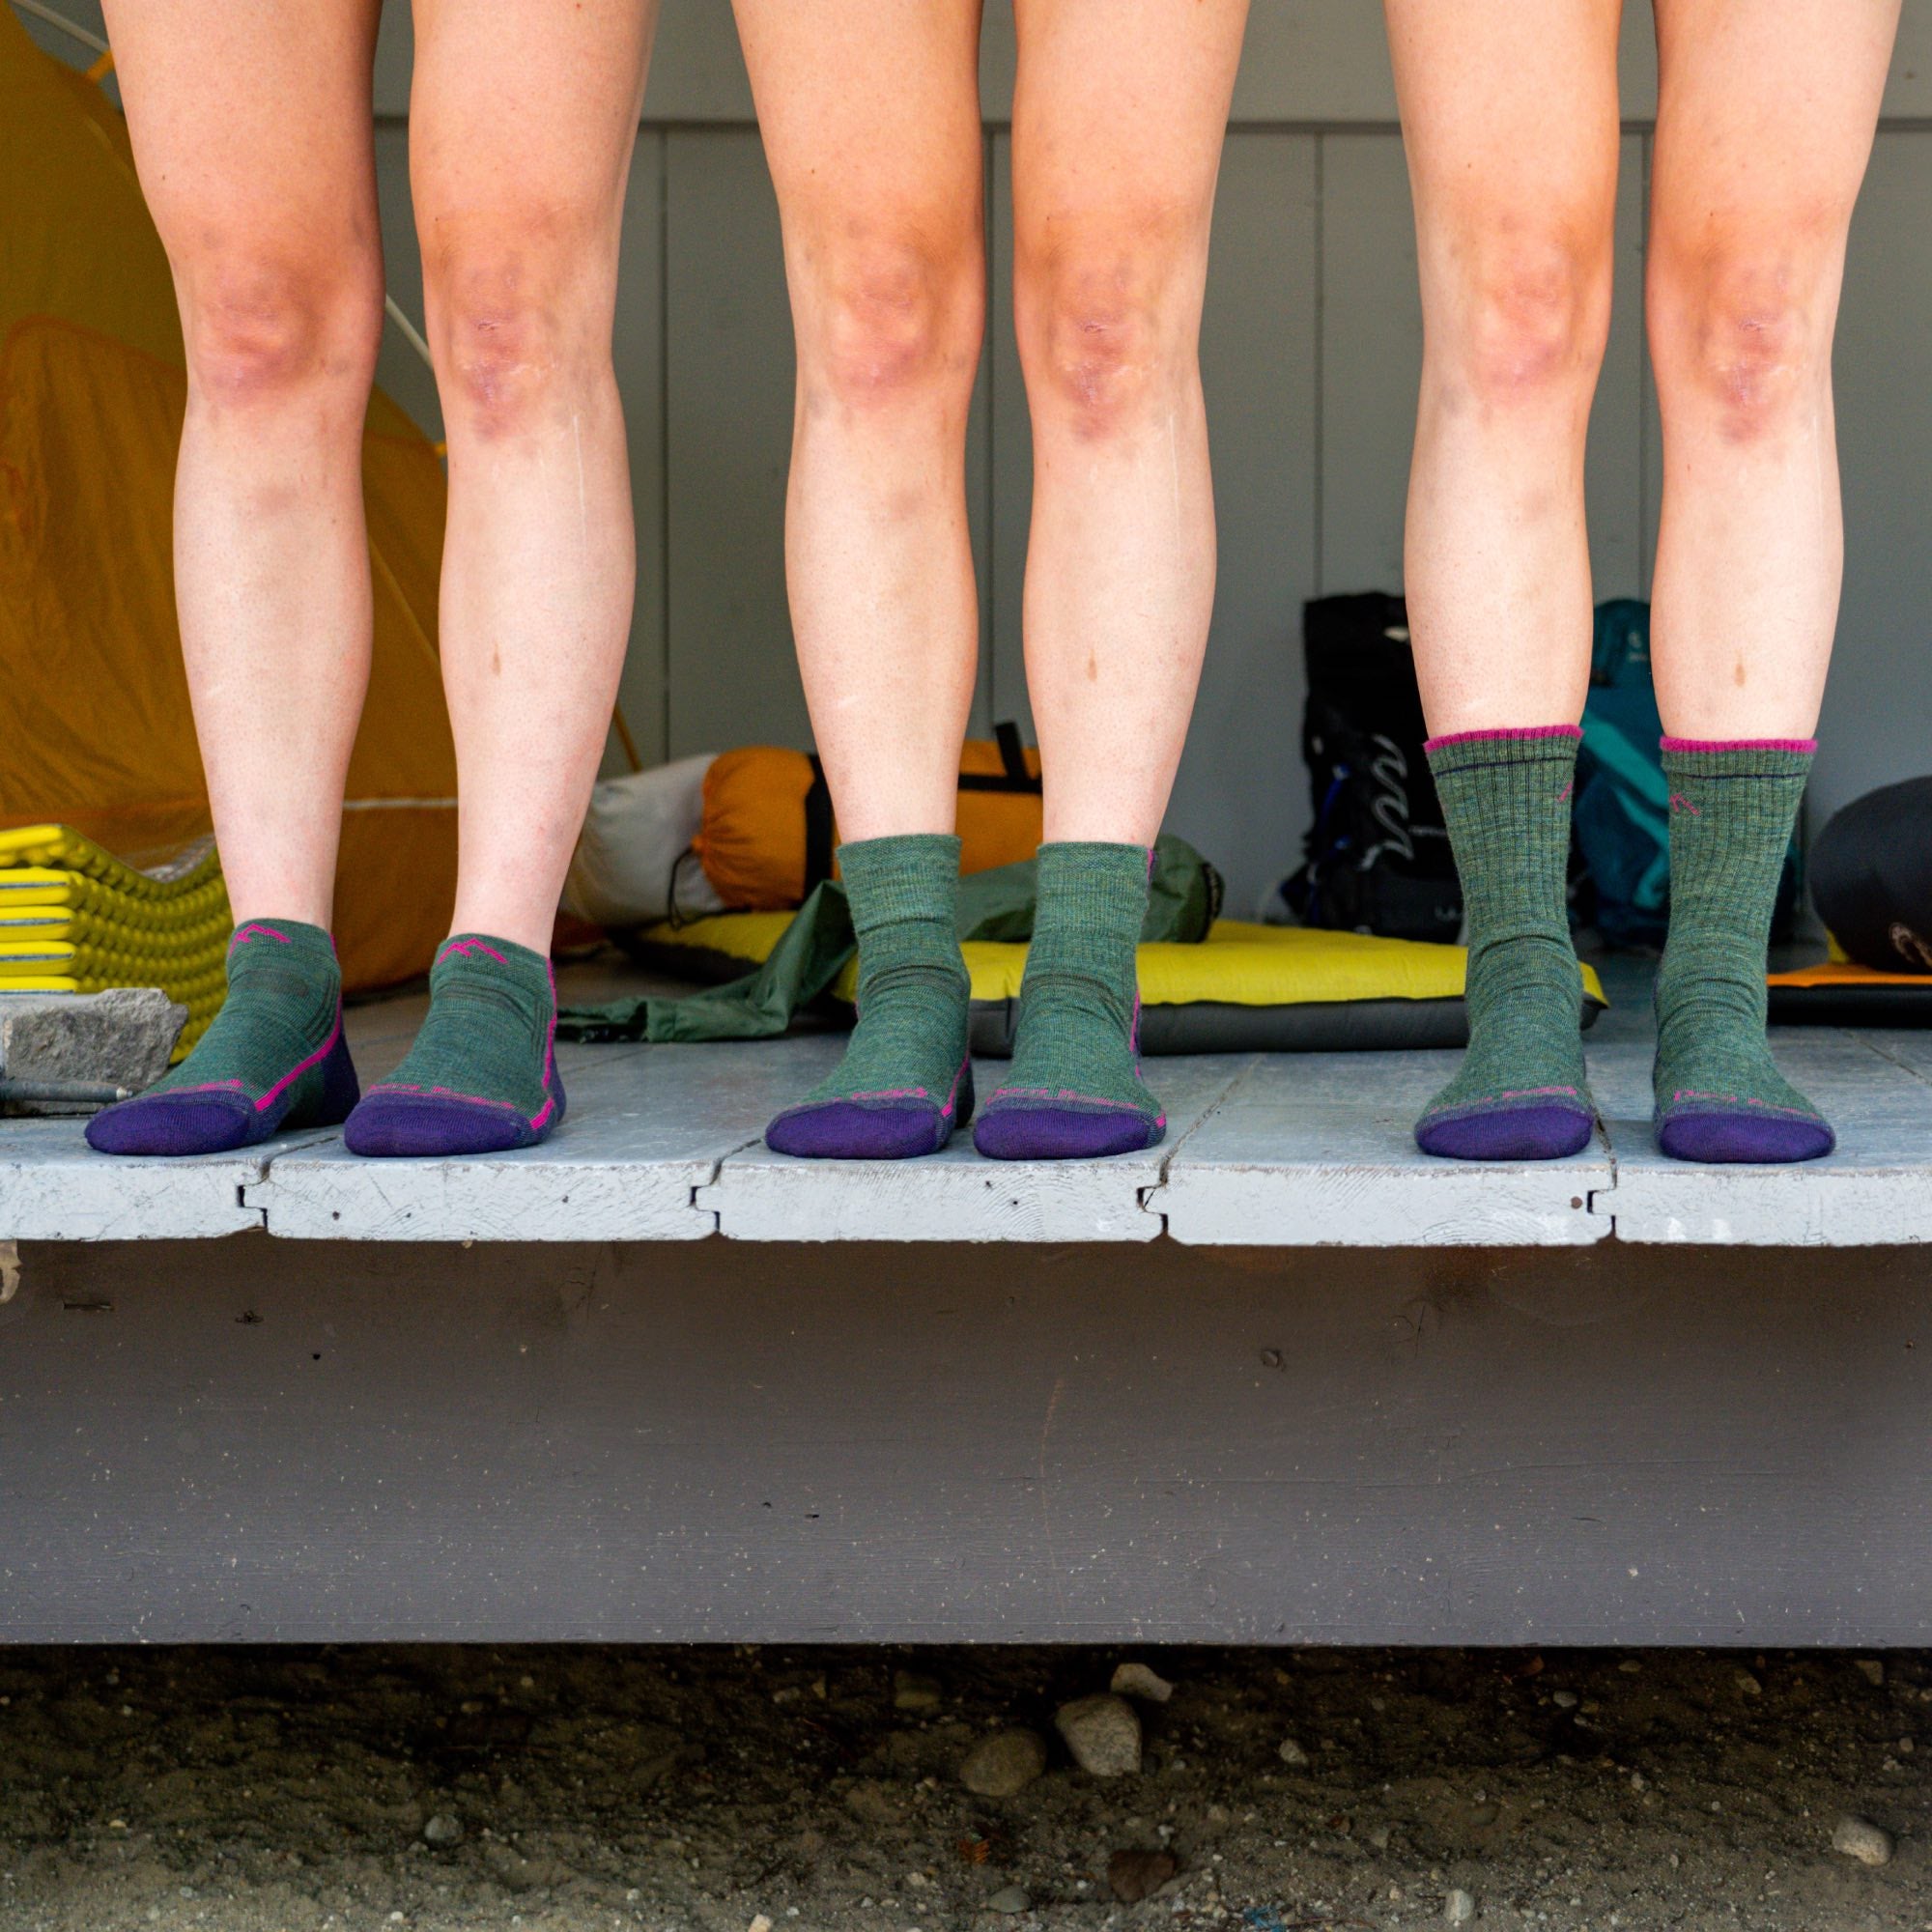 Our Sock Heights: A Complete-ish Guide – Darn Tough